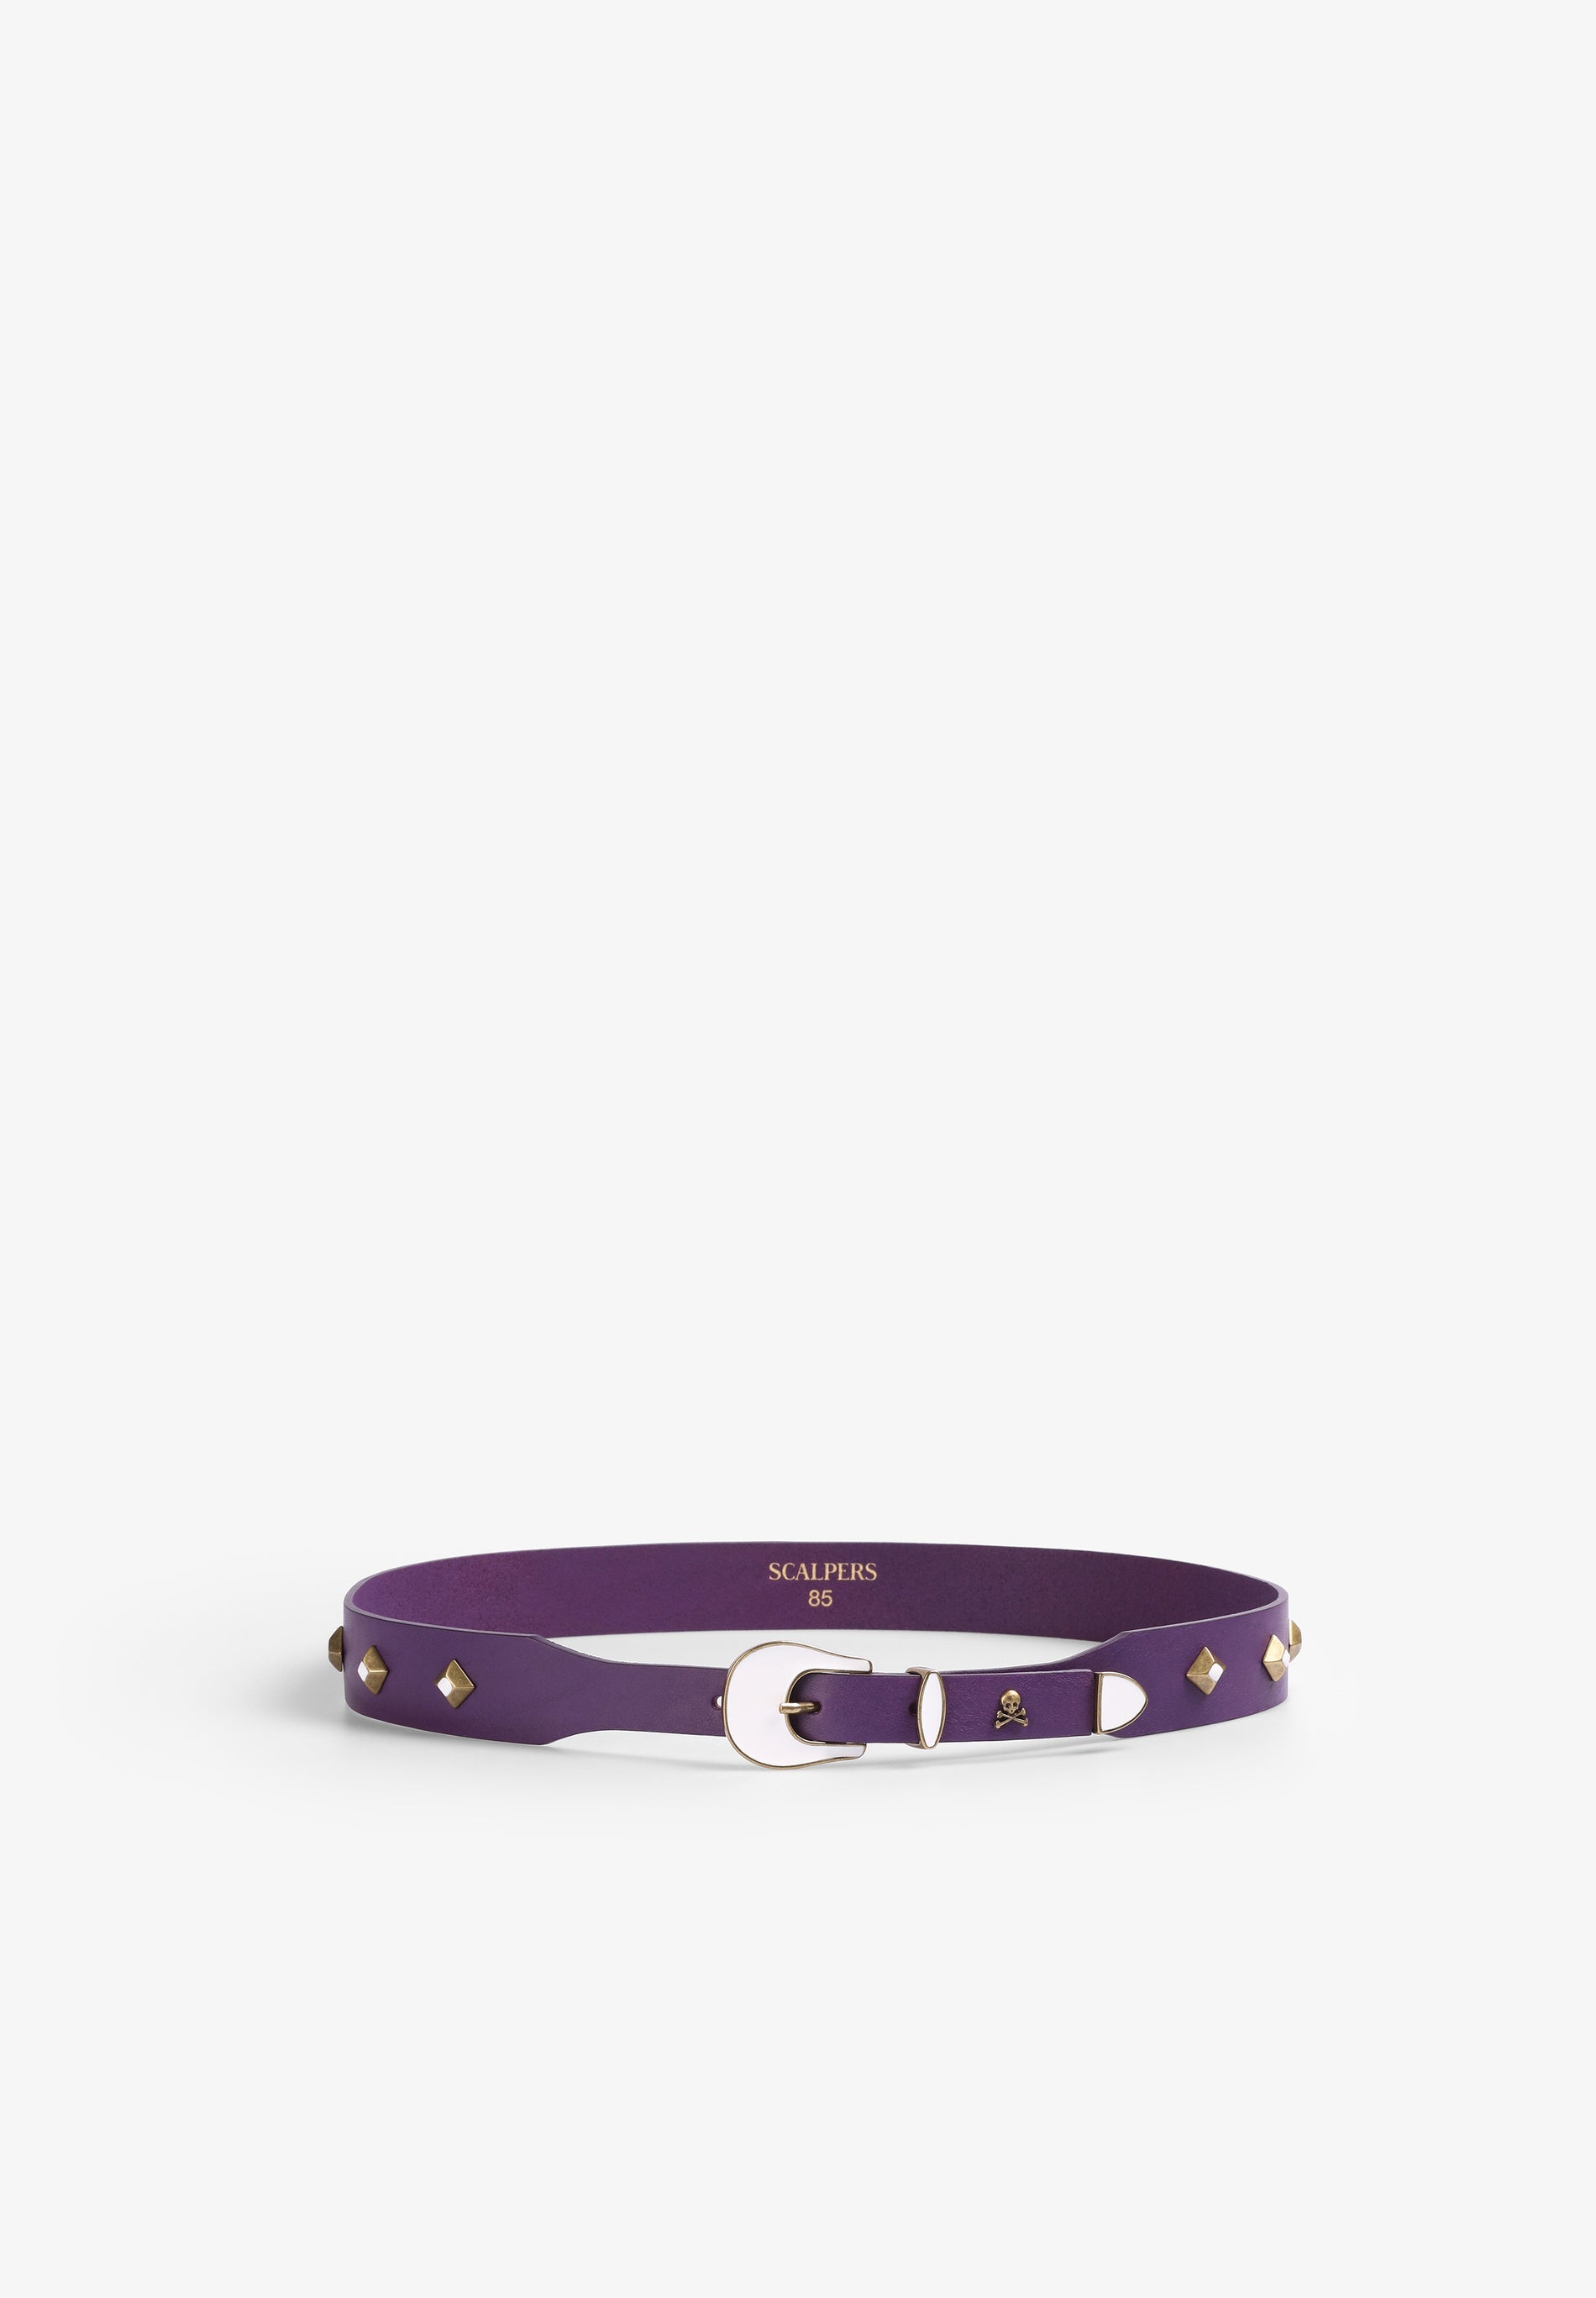 STUDDED LEATHER BELT WITH LACQUER DETAIL